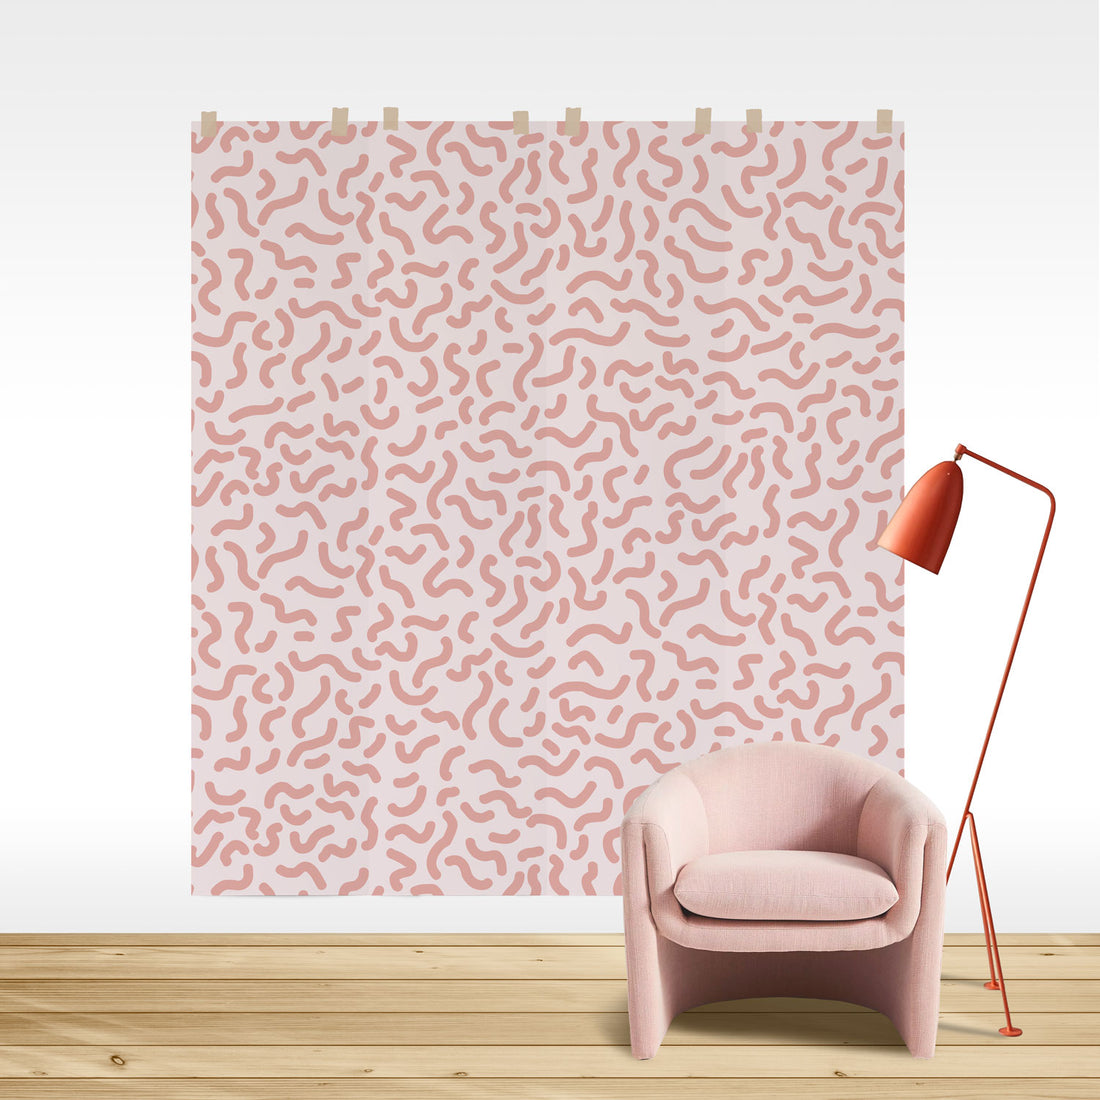 fun pink wall mural with lines pattern